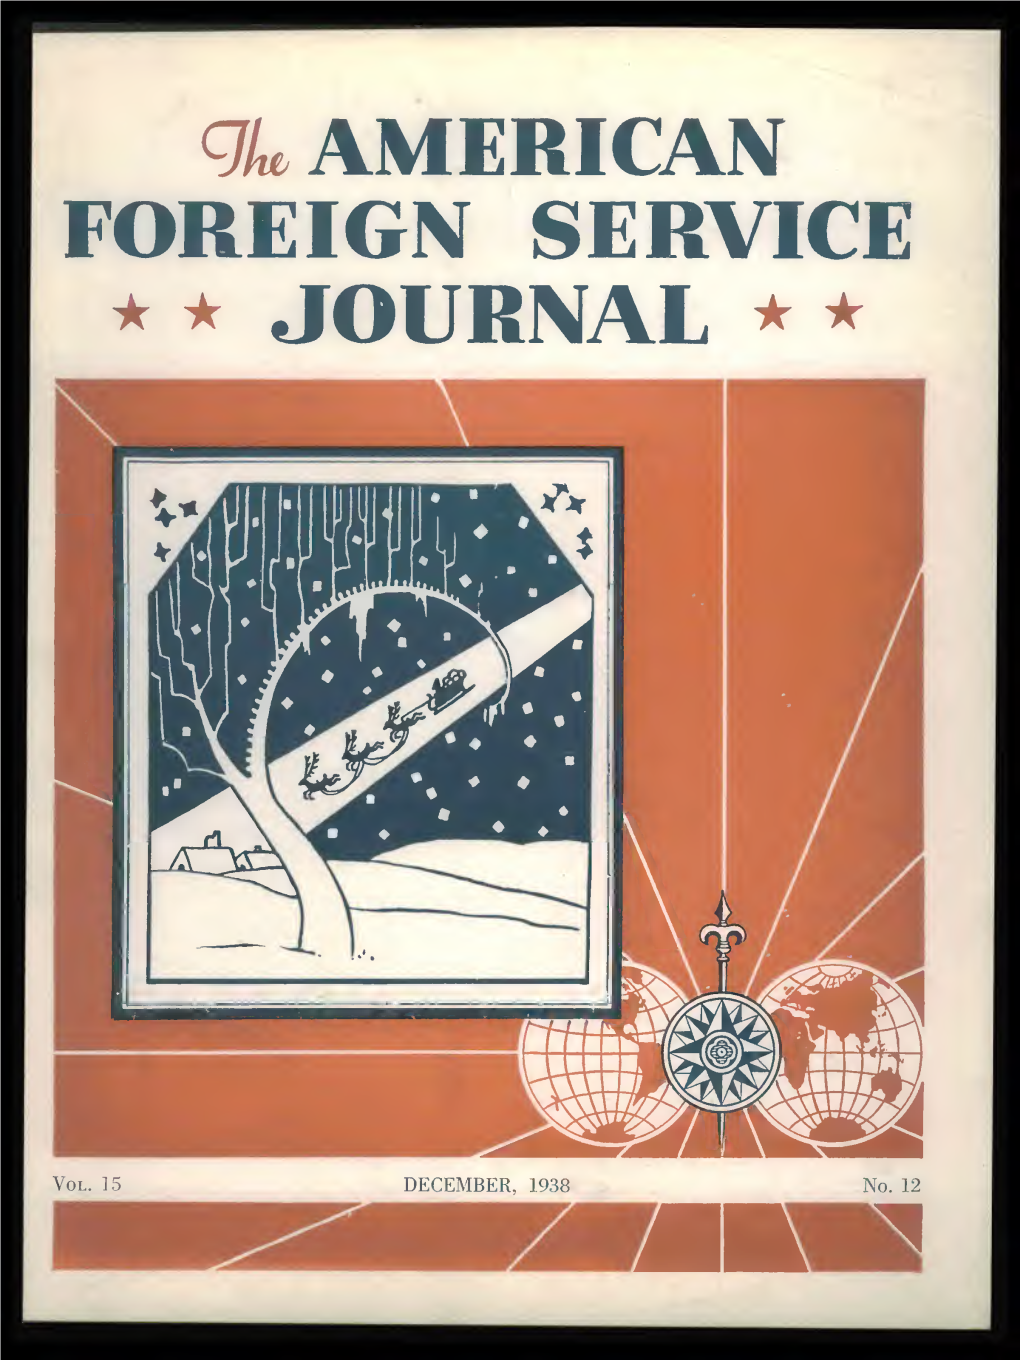 The Foreign Service Journal, December 1938